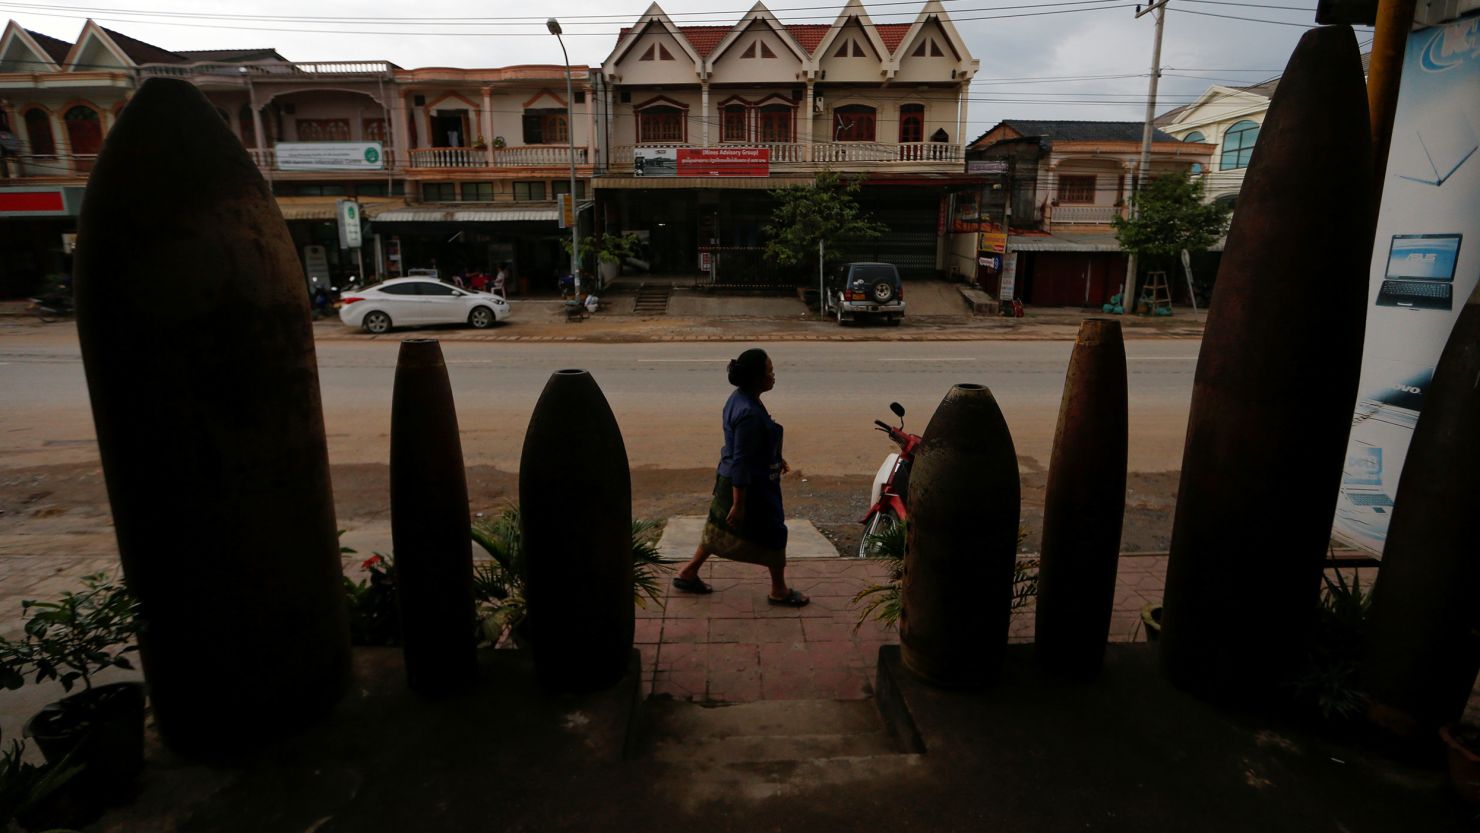 A woman walks past a restaurant littered with unexploded bombs dropped by US Air Force planes during the Vietnam War, in Xieng Khouang, Laos September 2, 2016.